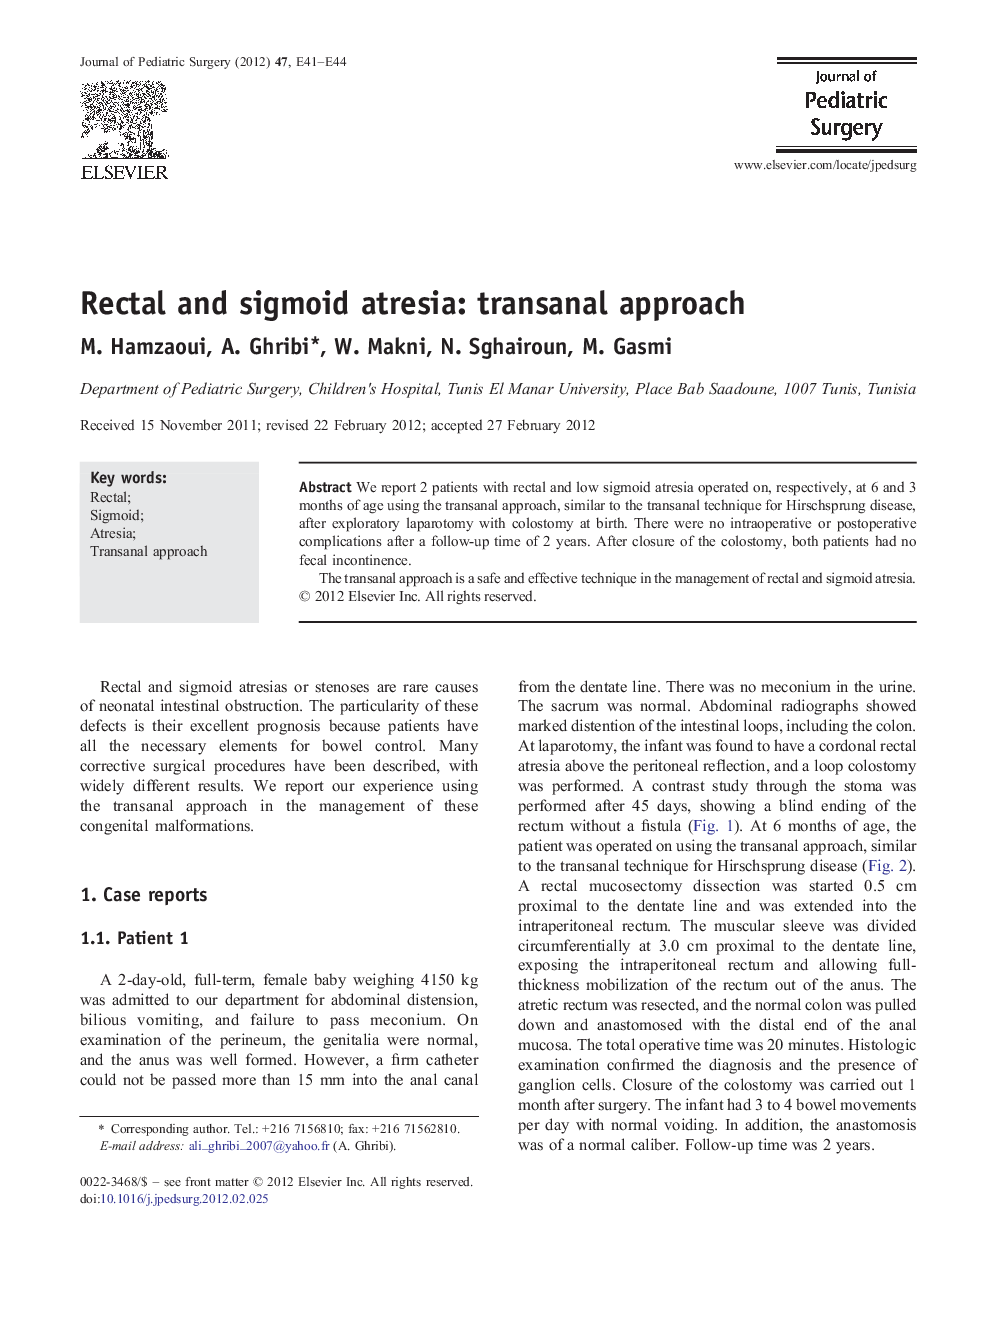 Rectal and sigmoid atresia: transanal approach